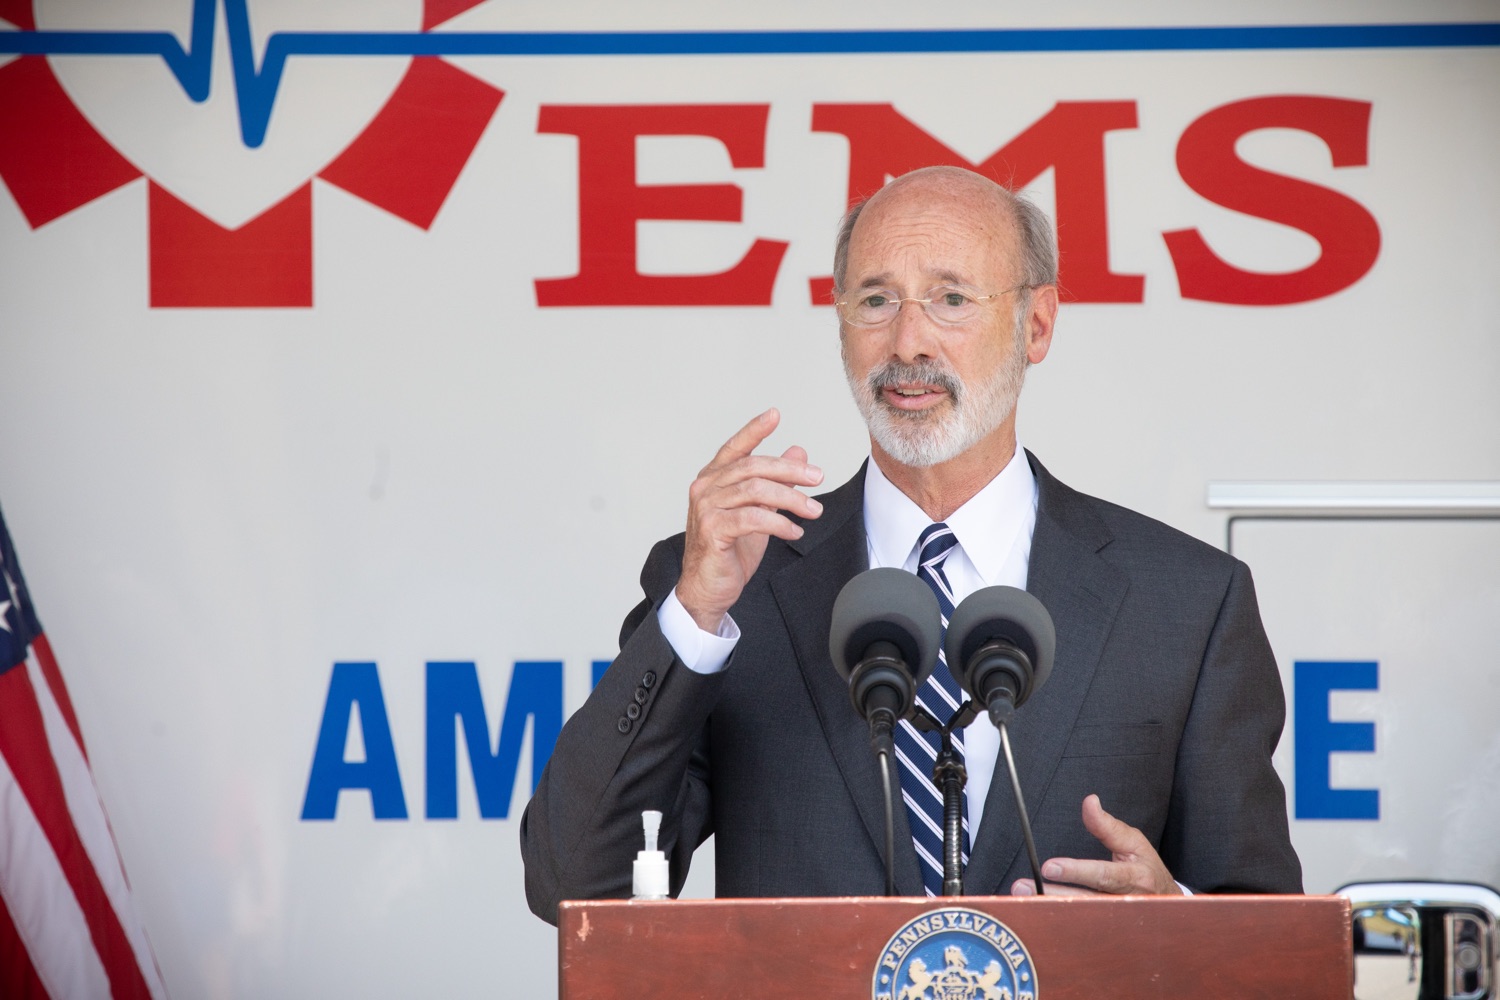 Pennsylvania Governor Tom Wolf speaking to the press. Governor Tom Wolf visited the Millersville location of Lancaster EMS today to thank first responders and learn about how they are adapting their critical work during the states response to the COVID-19 pandemic.  Millersville, PA  July 30, 2020<br><a href="https://filesource.amperwave.net/commonwealthofpa/photo/18180_gov_first_responders_dz_011.jpg" target="_blank">⇣ Download Photo</a>